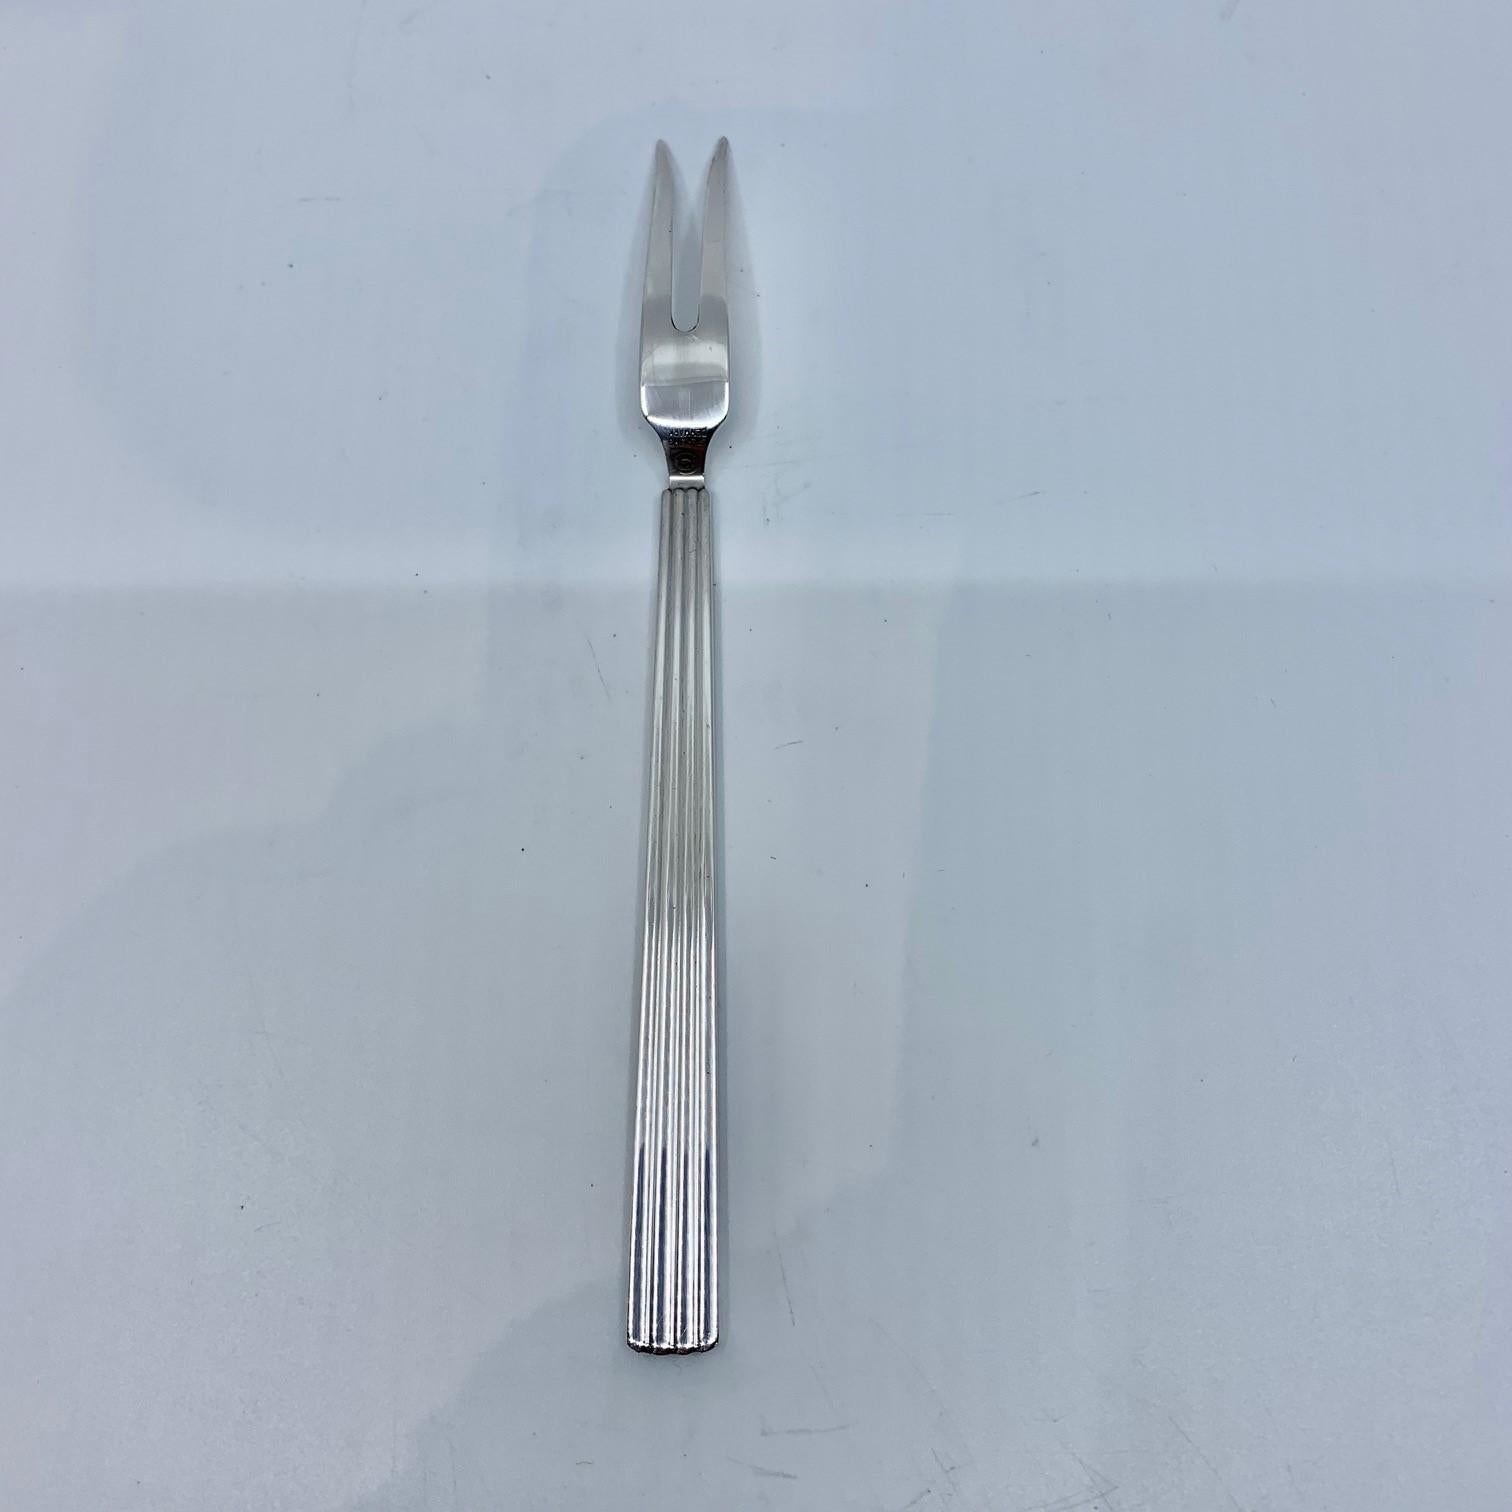 Sterling silver Georg Jensen large cold cuts fork, item 144b in the Bernadotte pattern, design #9 by Sigvard Bernadotte from 1939.

Additional information:
Material: Sterling Silver
Style: Art Deco
Hallmarks: With Georg Jensen hallmark, made in